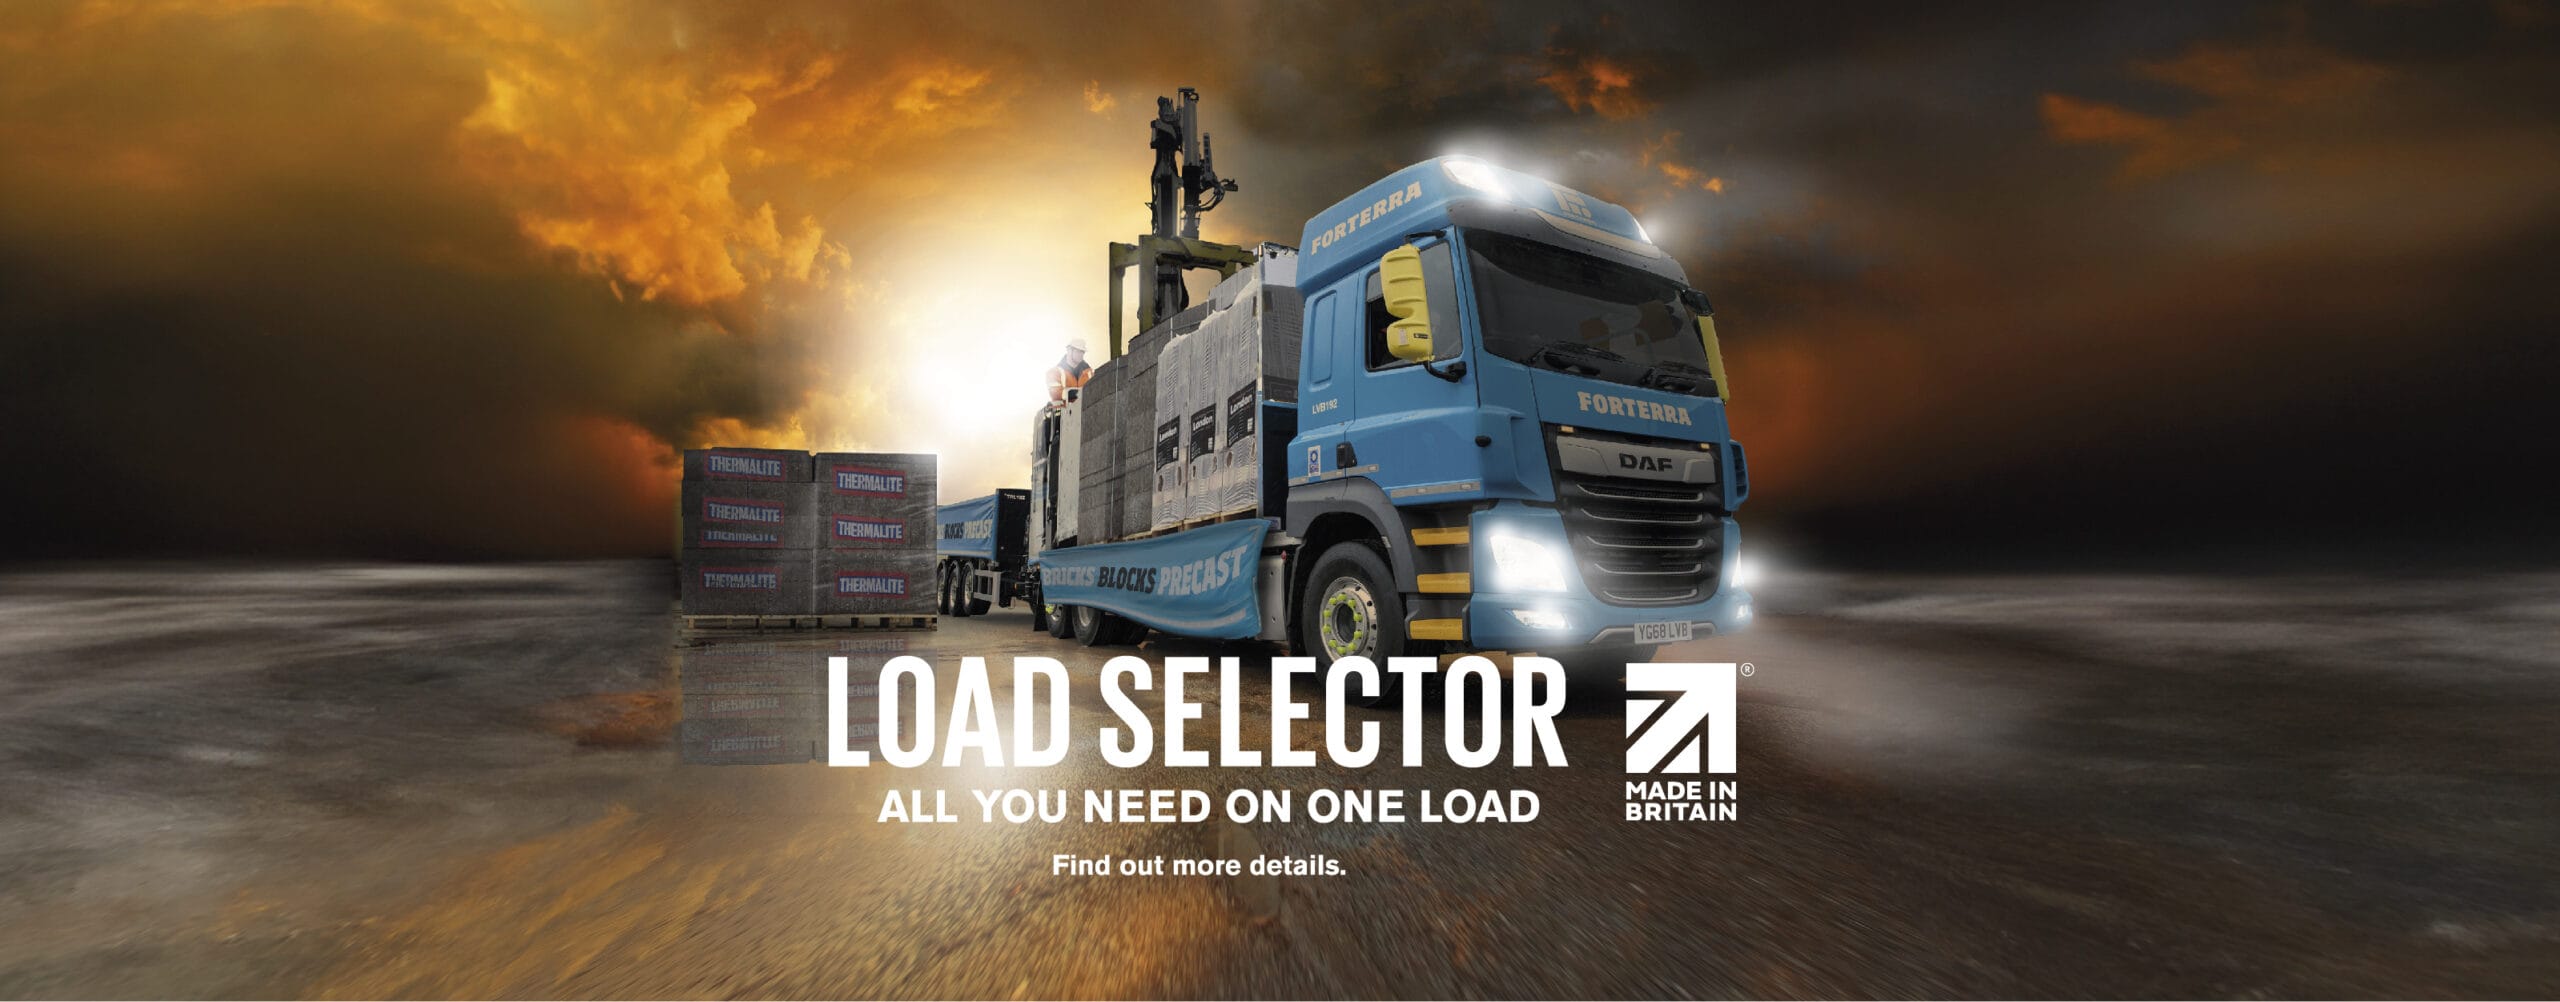 Load Selector, All you need on one load. Find out more details.